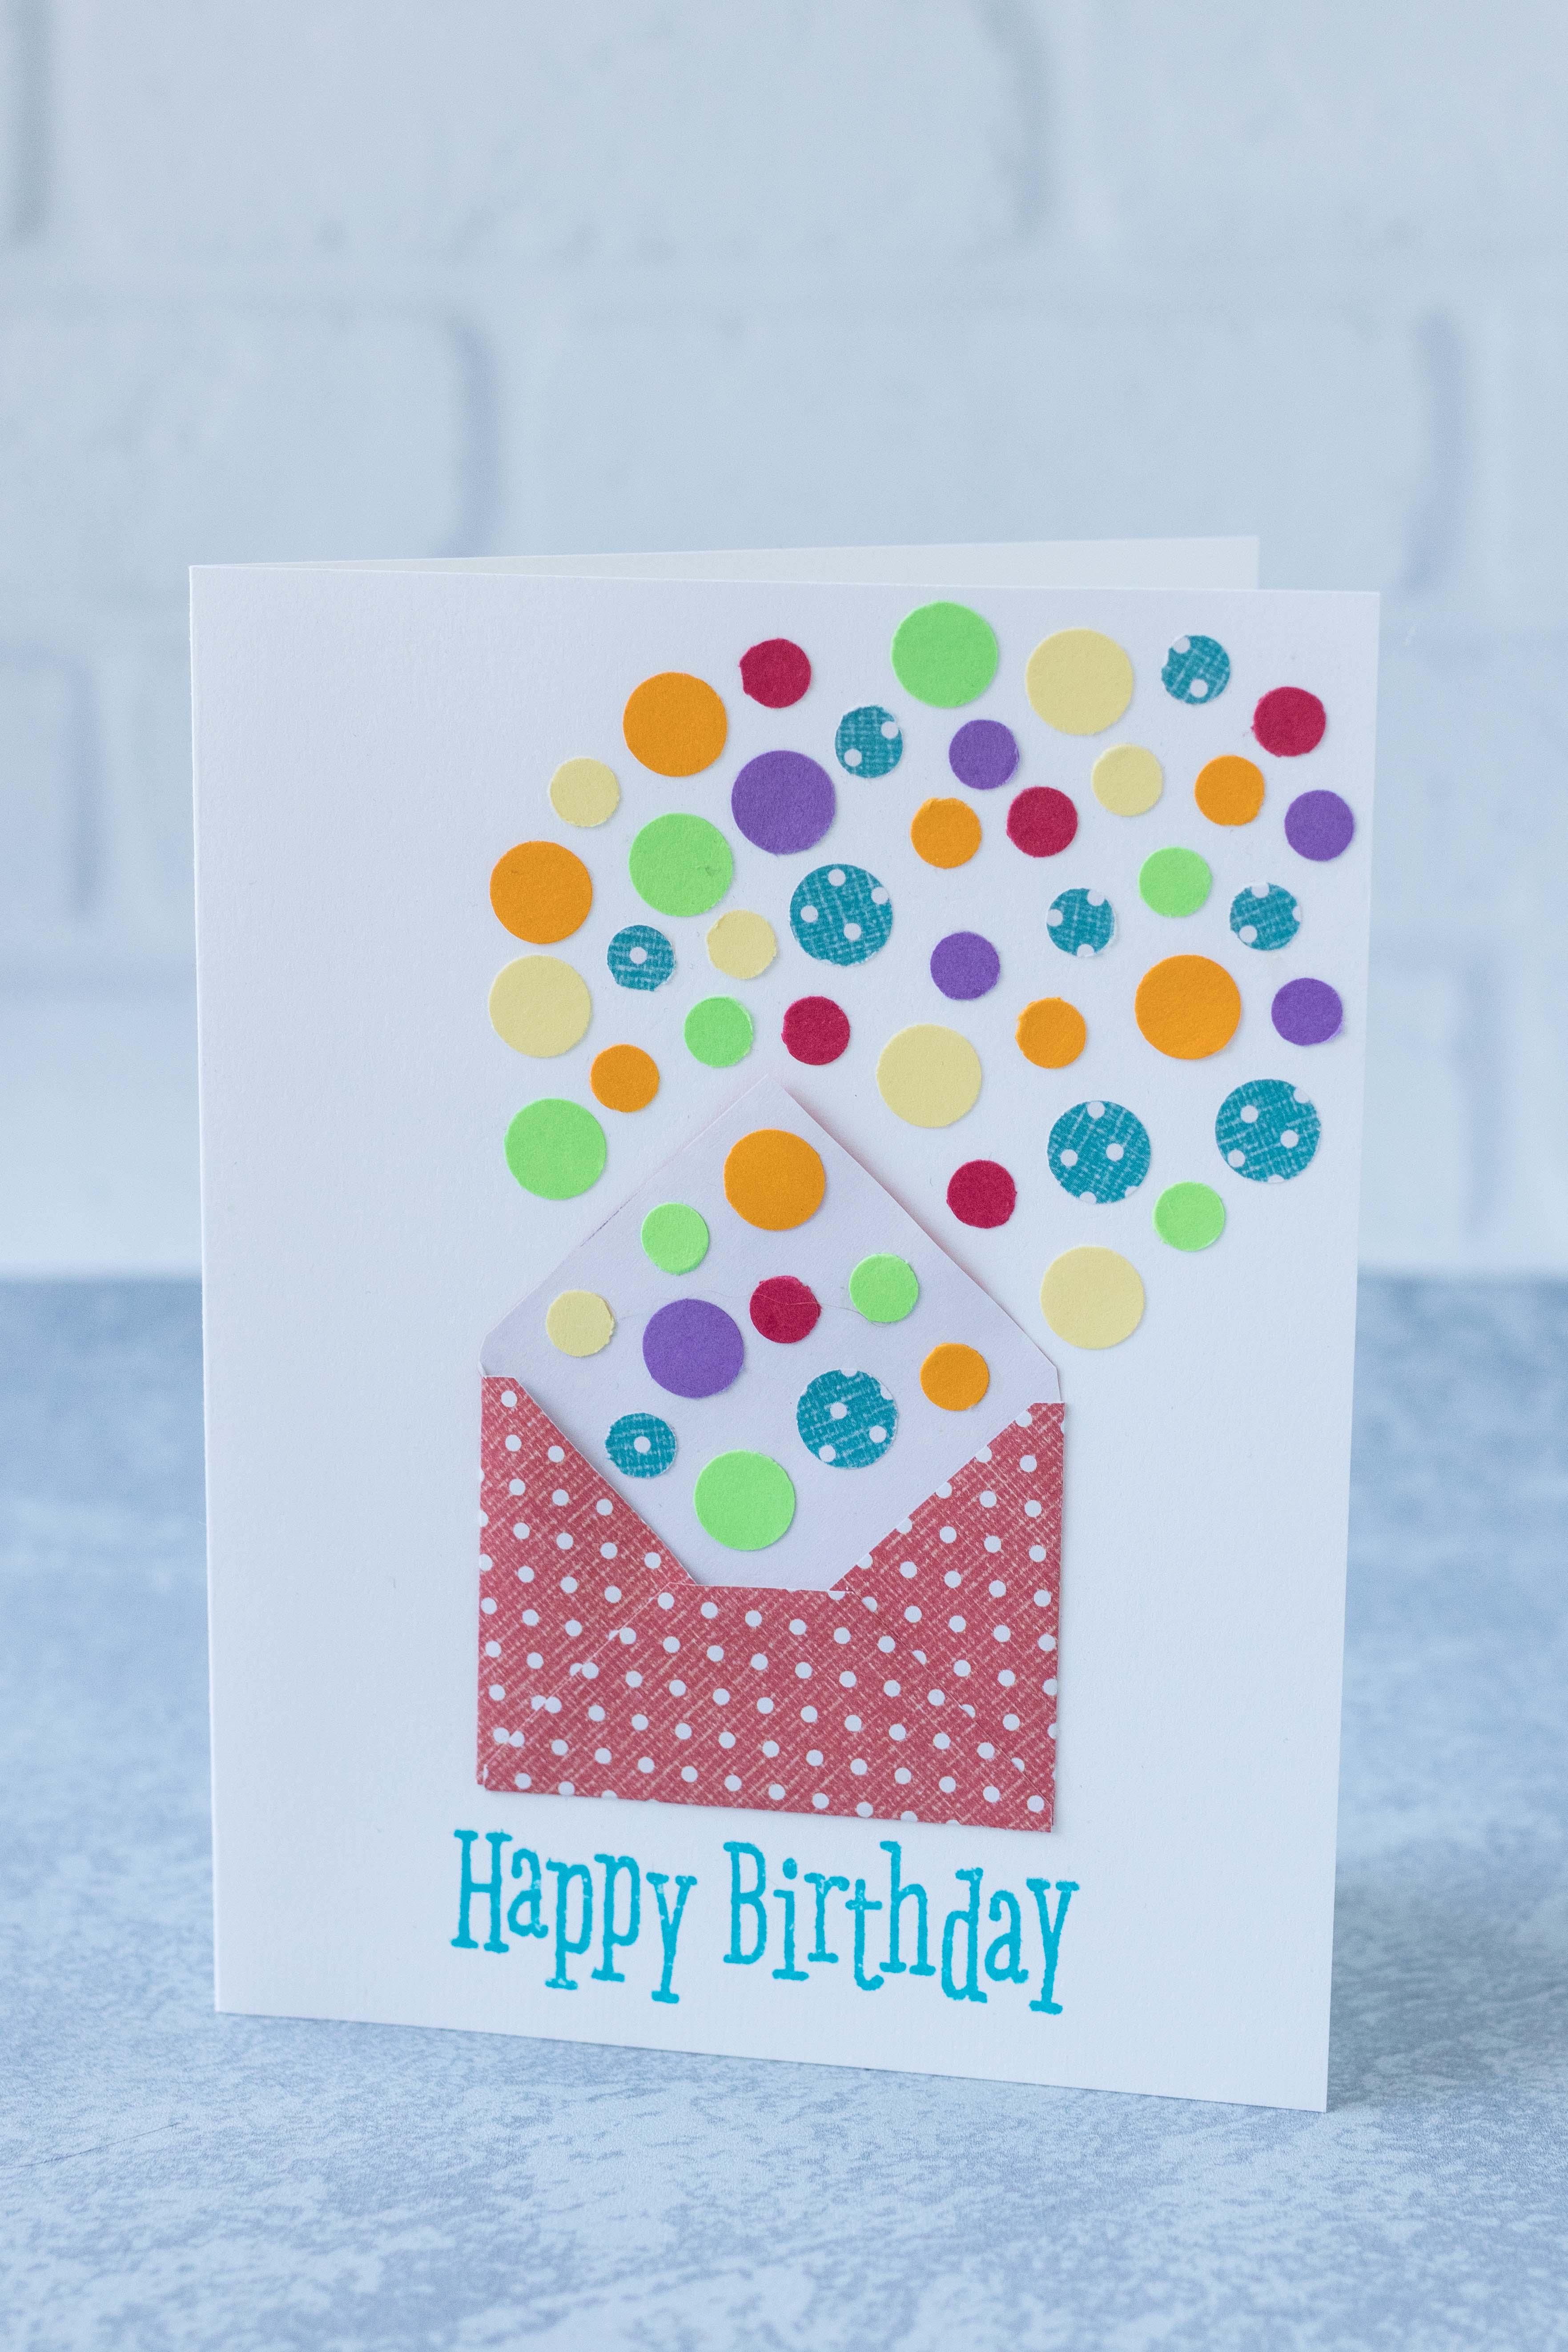 DIY birthday card with confetti circles spilling out of a tiny red and white polka dot envelope. #birthdaycard #birthdayconfetti #DIYgreetingcard | https://www.roseclearfield.com